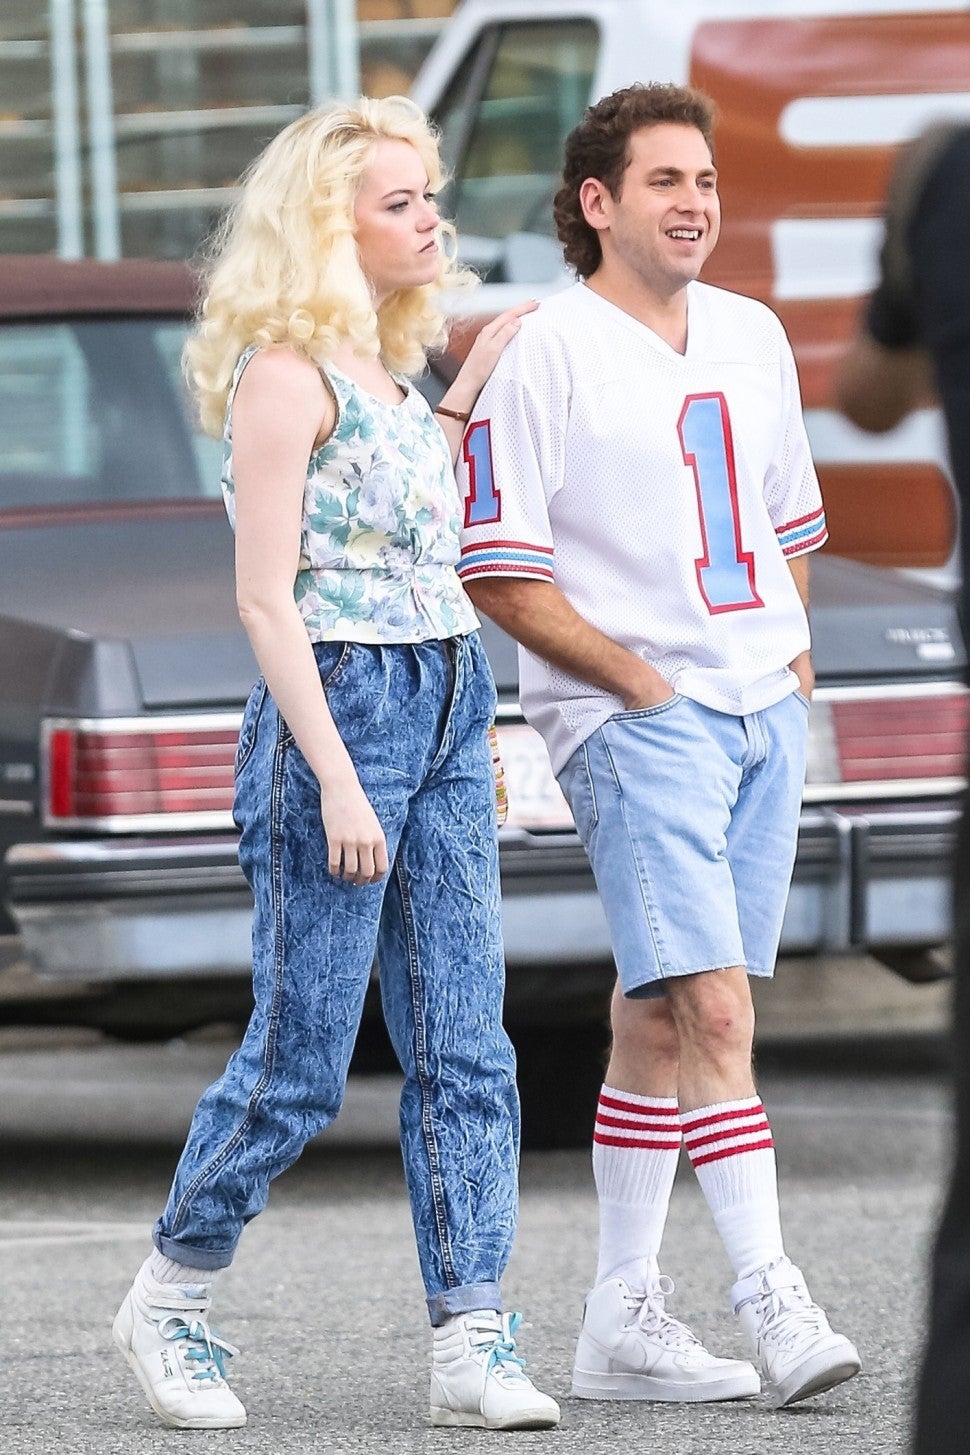 Actors Emma Stone and Jonah Hill take it back to the 80's while filming their upcoming Netflix series 'Maniac' in New York City. A slimmed down Jonah was sporting a sweet mullet on set.